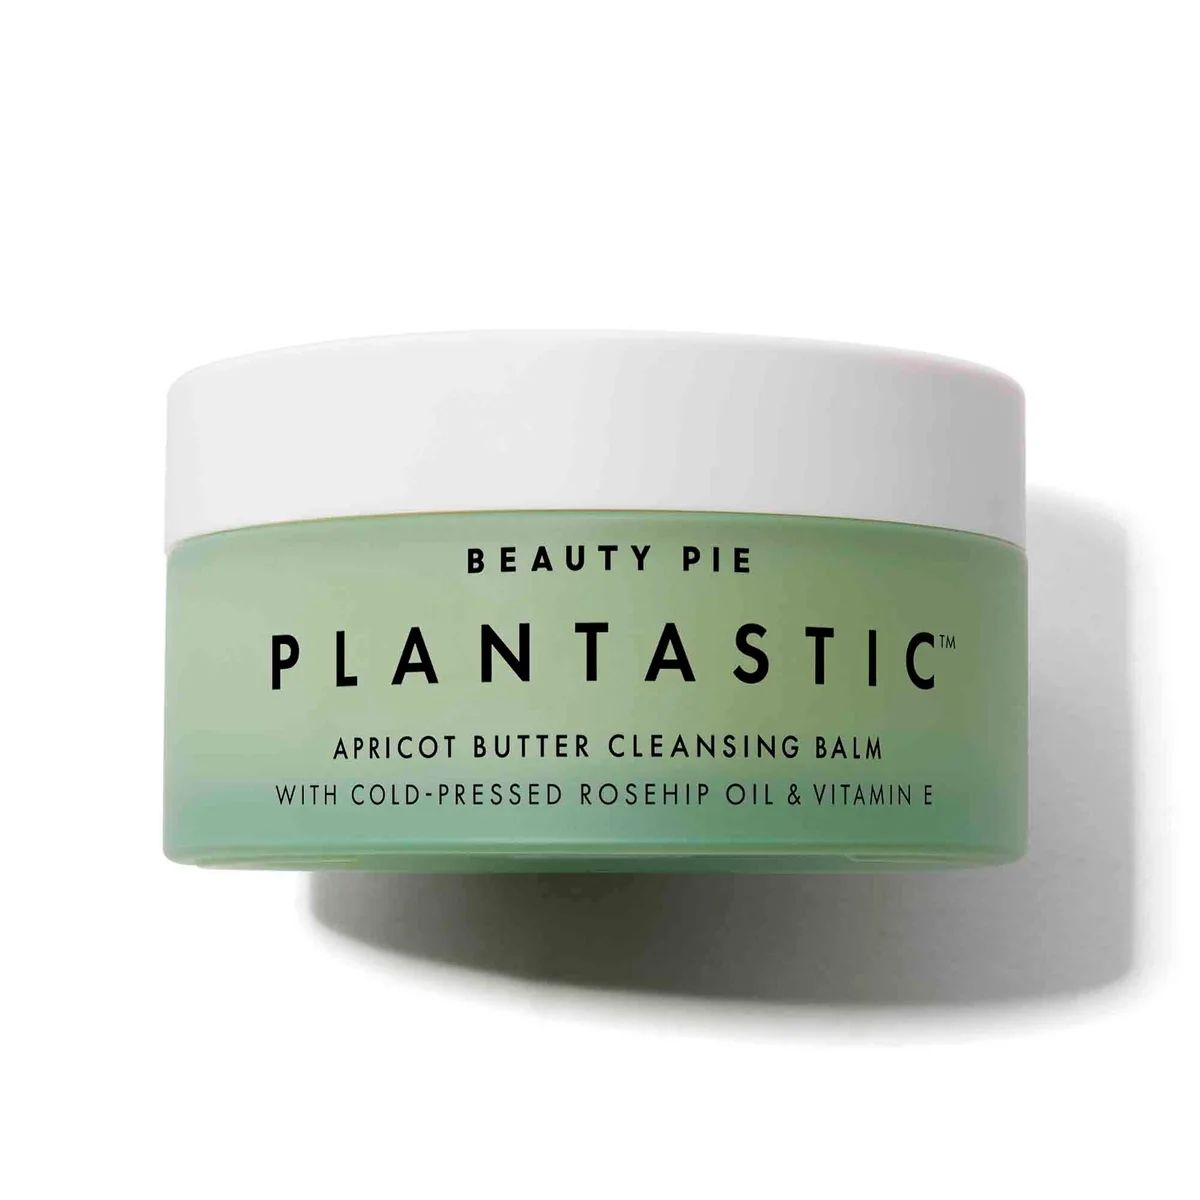 Apricot Butter Cleansing Balm | Beauty Pie (UK)